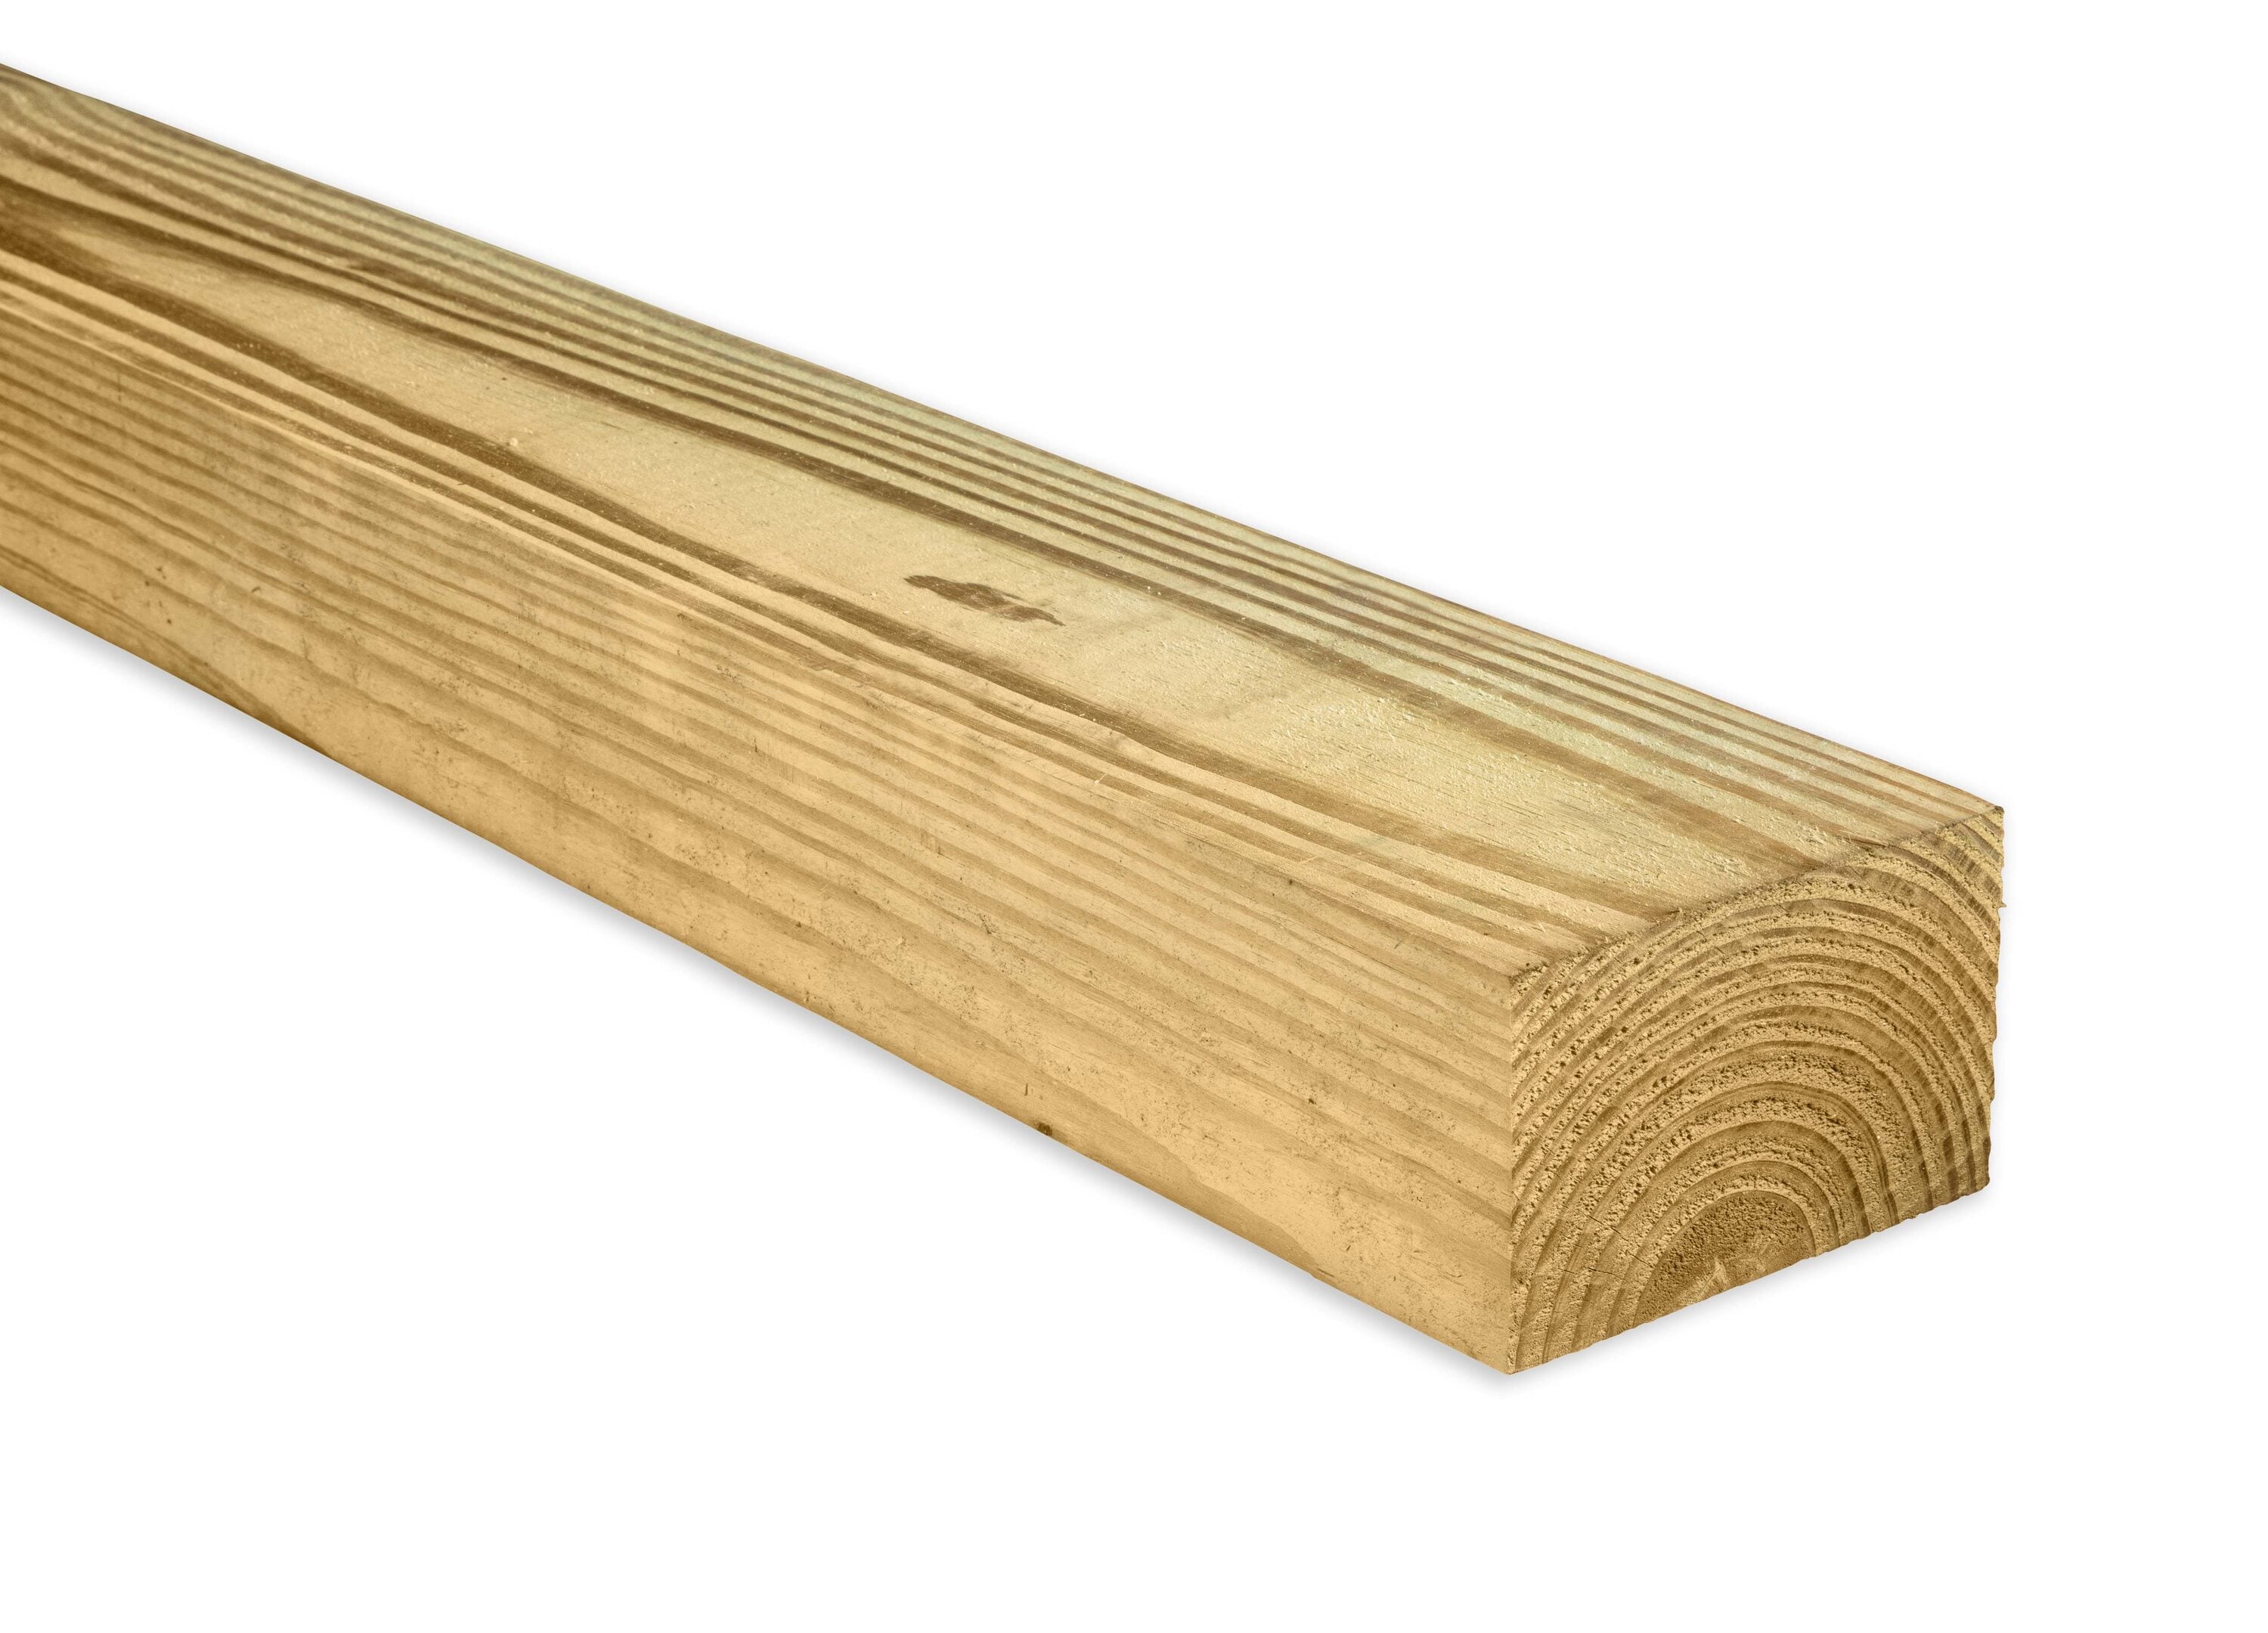 1/2-in x 4-ft x 8-ft Southern Yellow Pine MDF (Medium-Density Fiberboard)  at